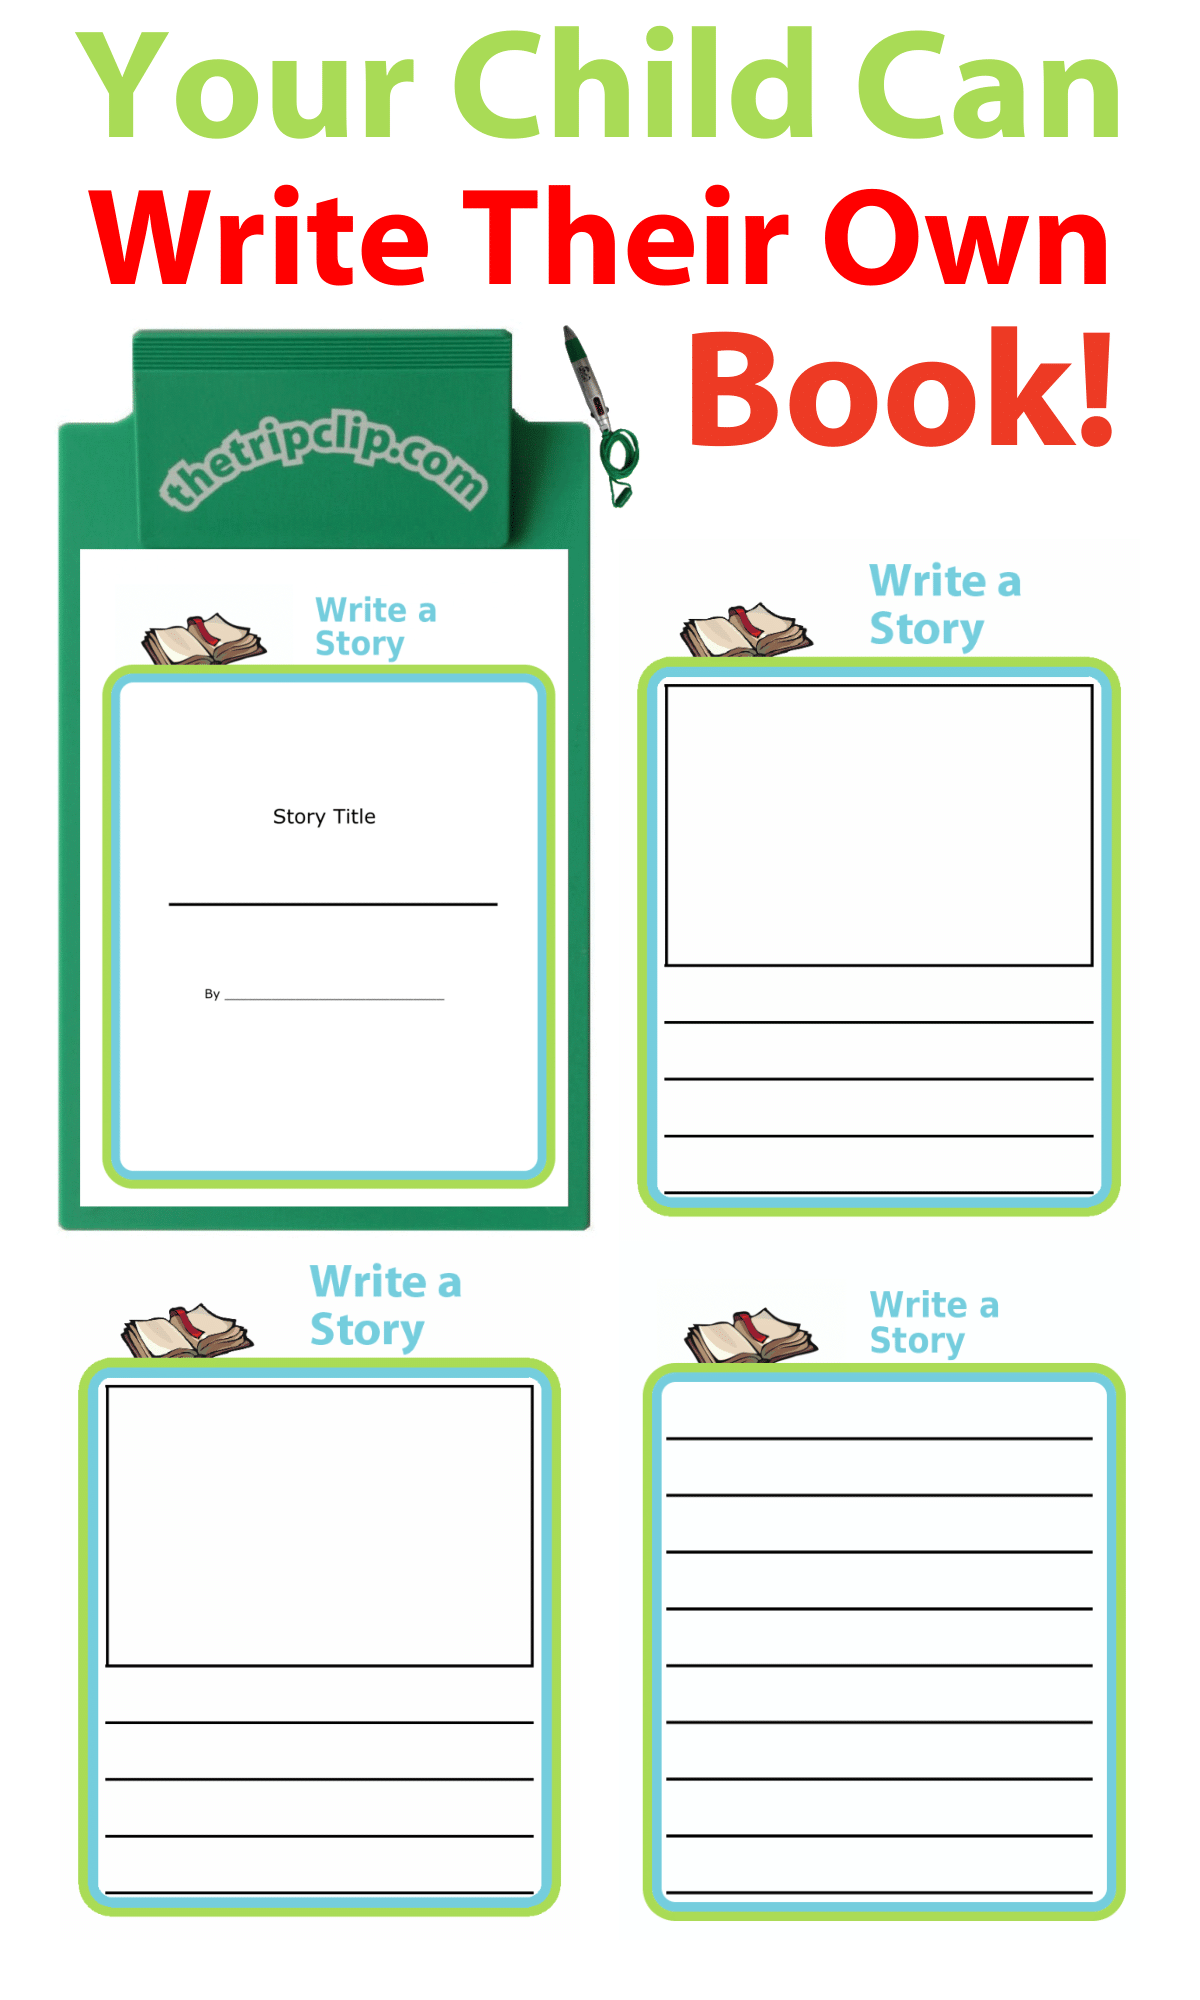 Story Templates to Get Kids Writing - The Trip Clip